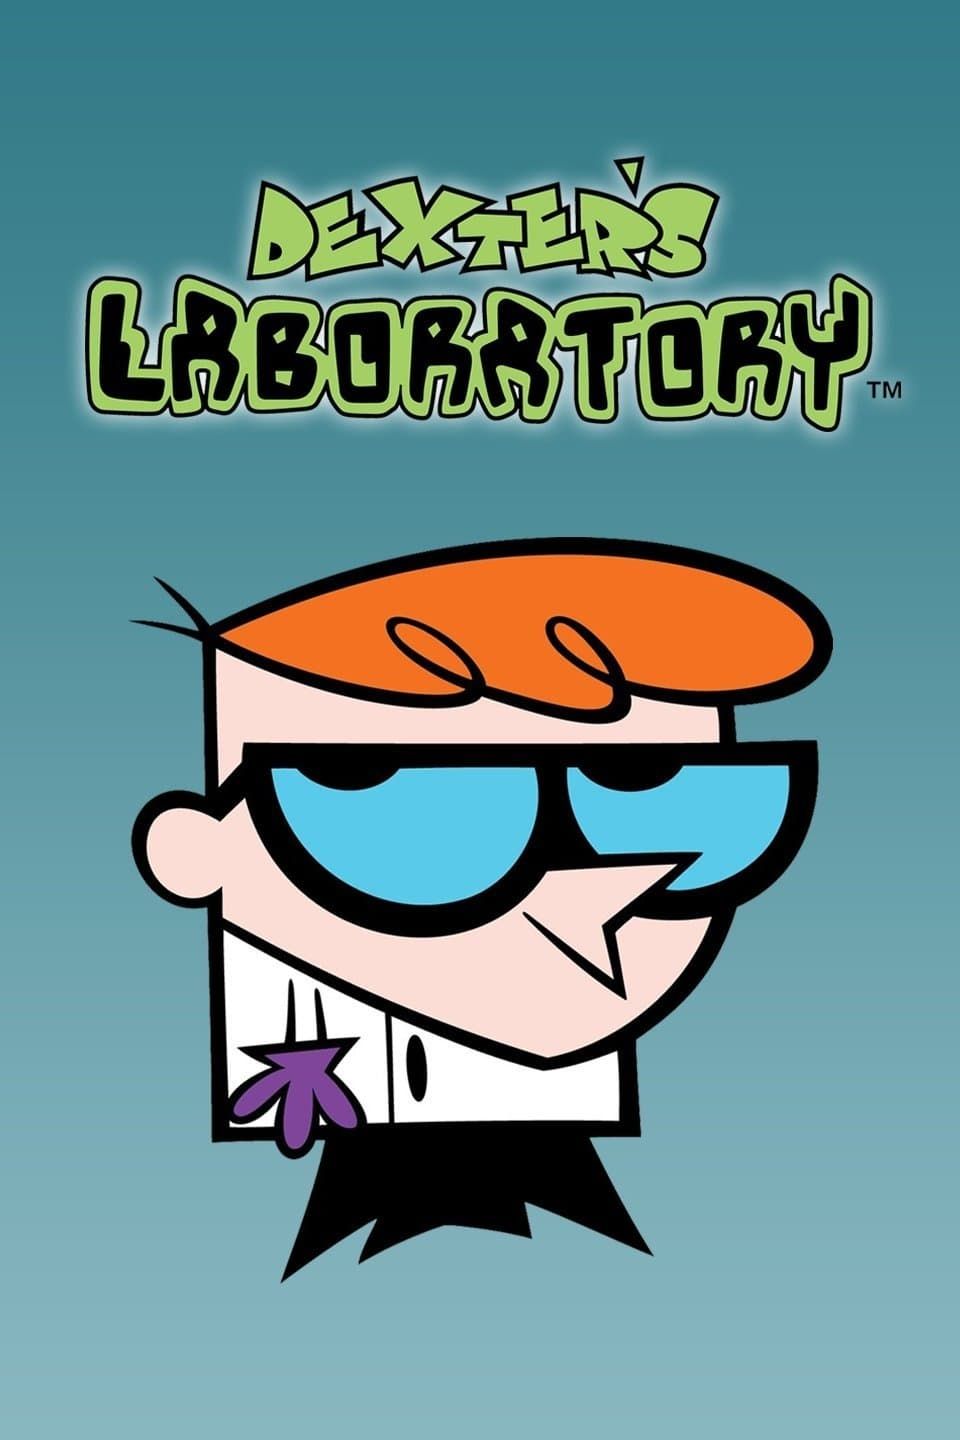 Dexter's Laboratory poster with Dexter